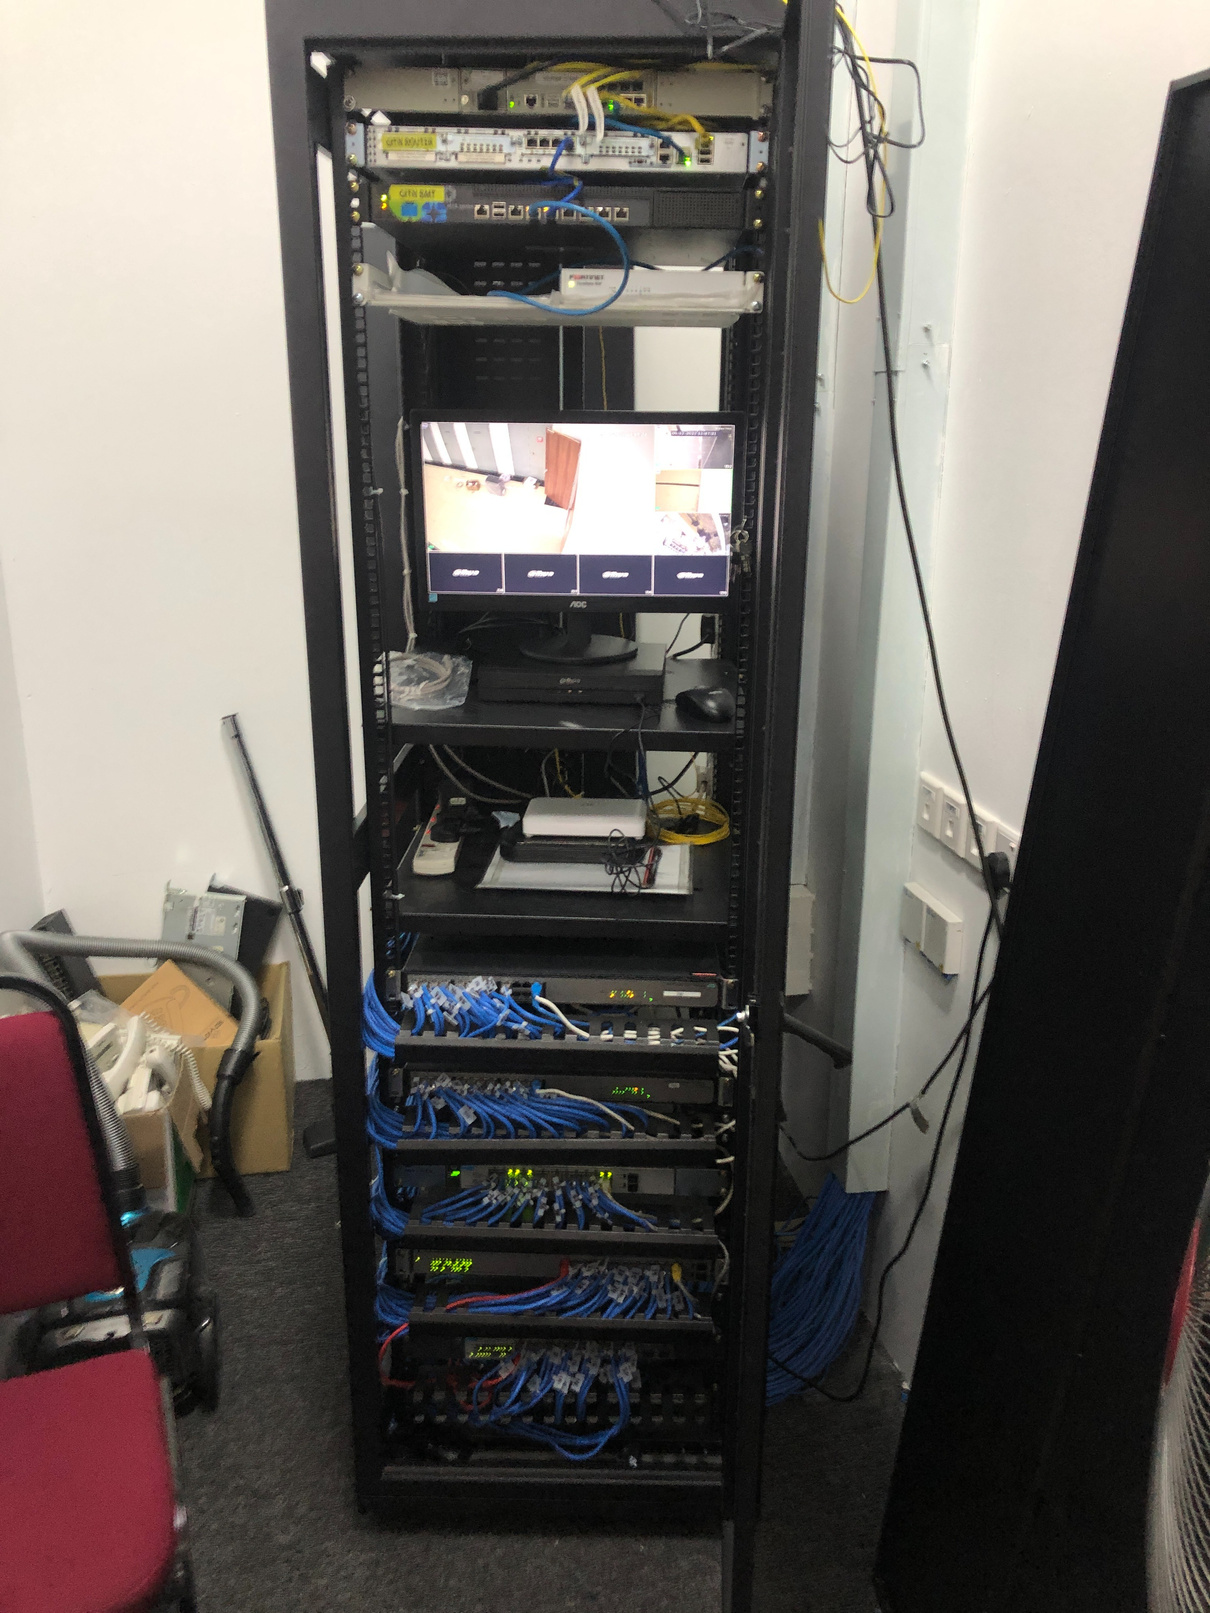 a rack full of network equipment and IP CAMERA NVR